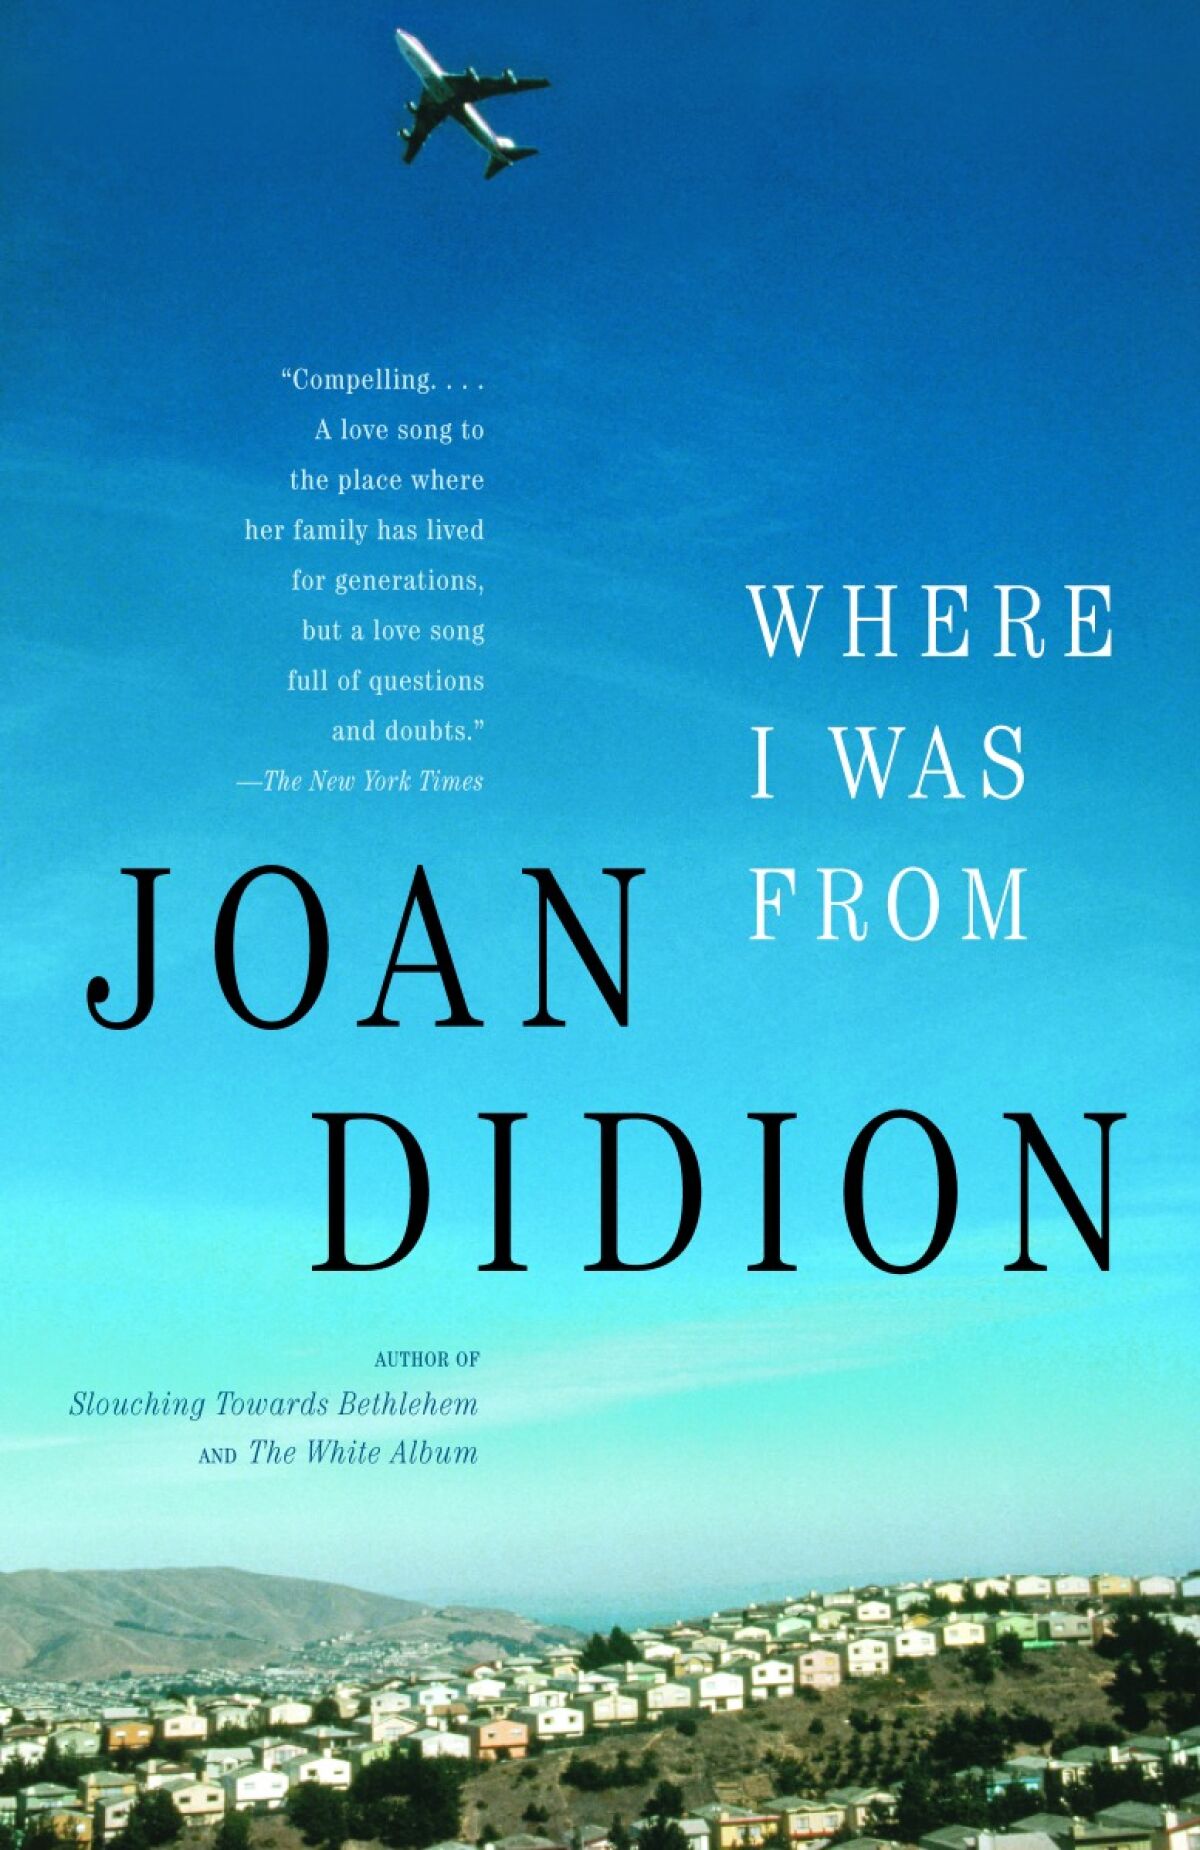 The cover of "Where I Was From" shows an airplane flying in a clear sky over a suburban landscape